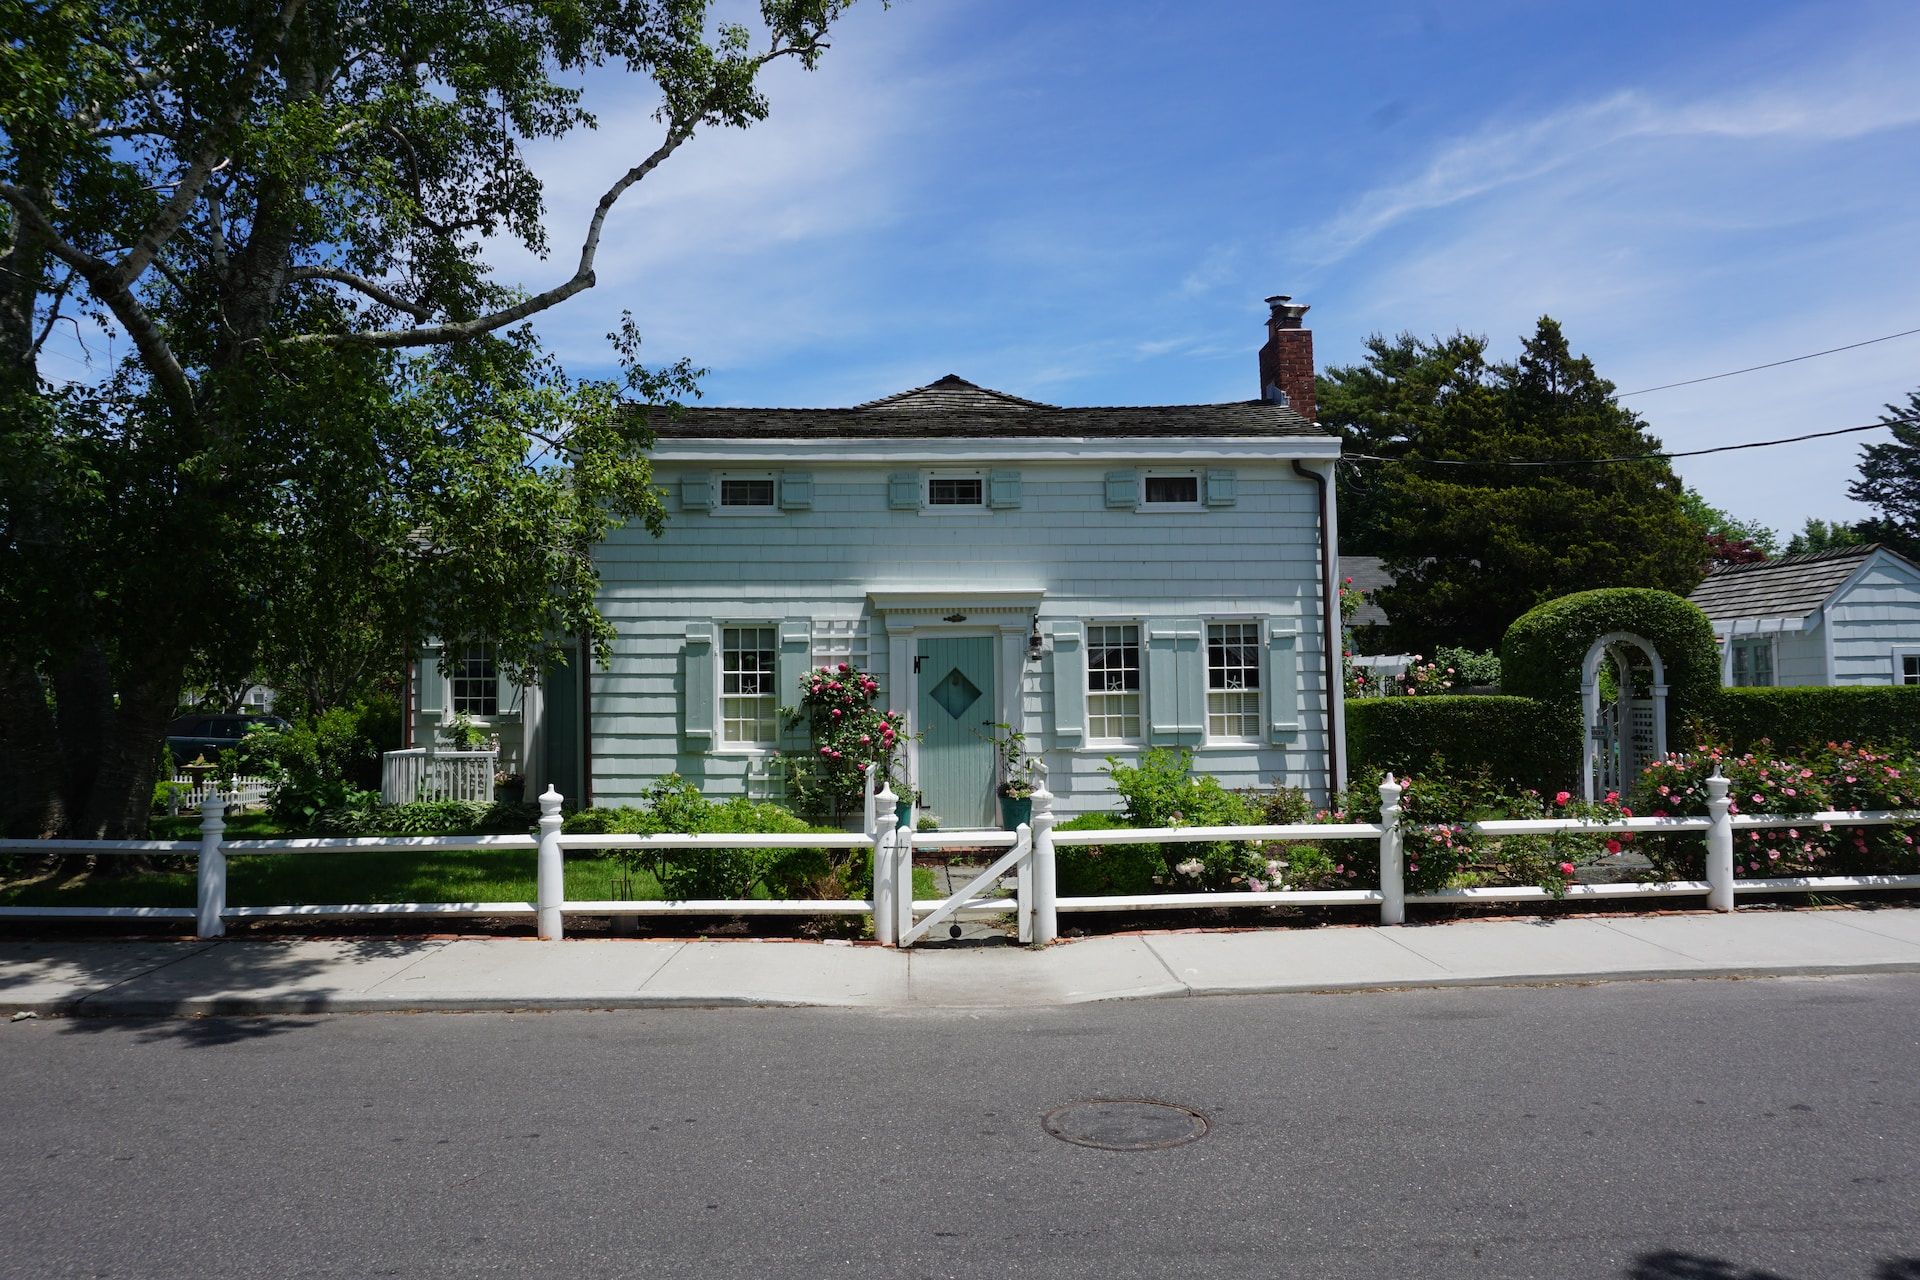 View of a charming house in the village of Greenport in the Hamptons